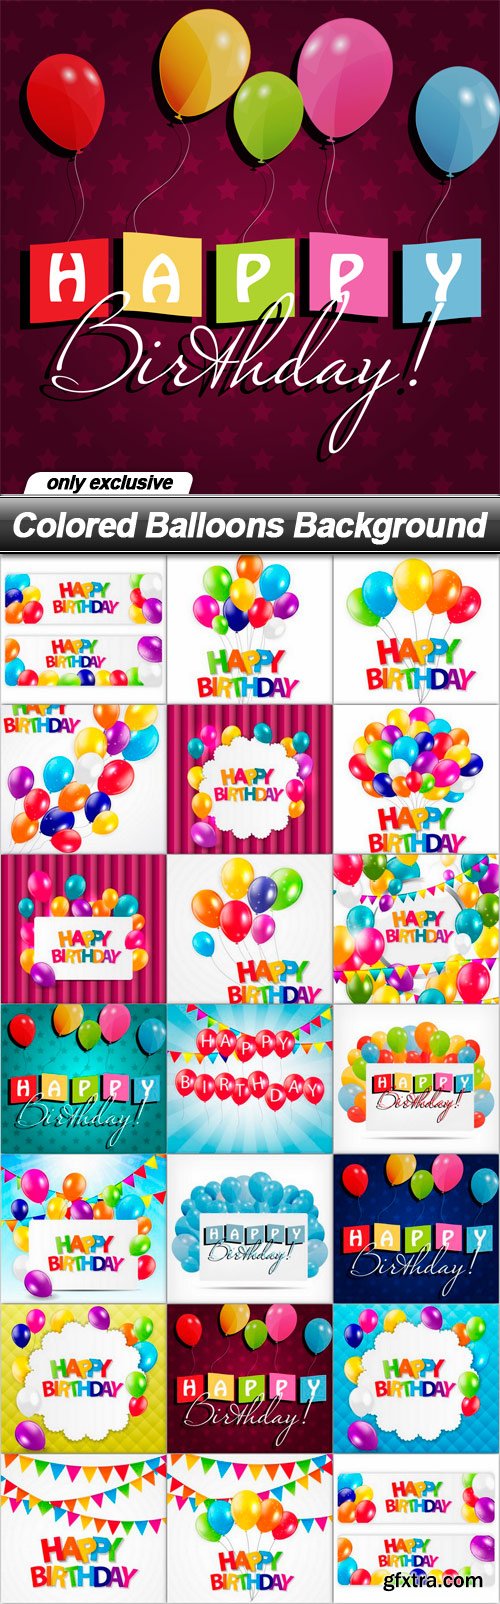 Colored Balloons Background - 20 EPS